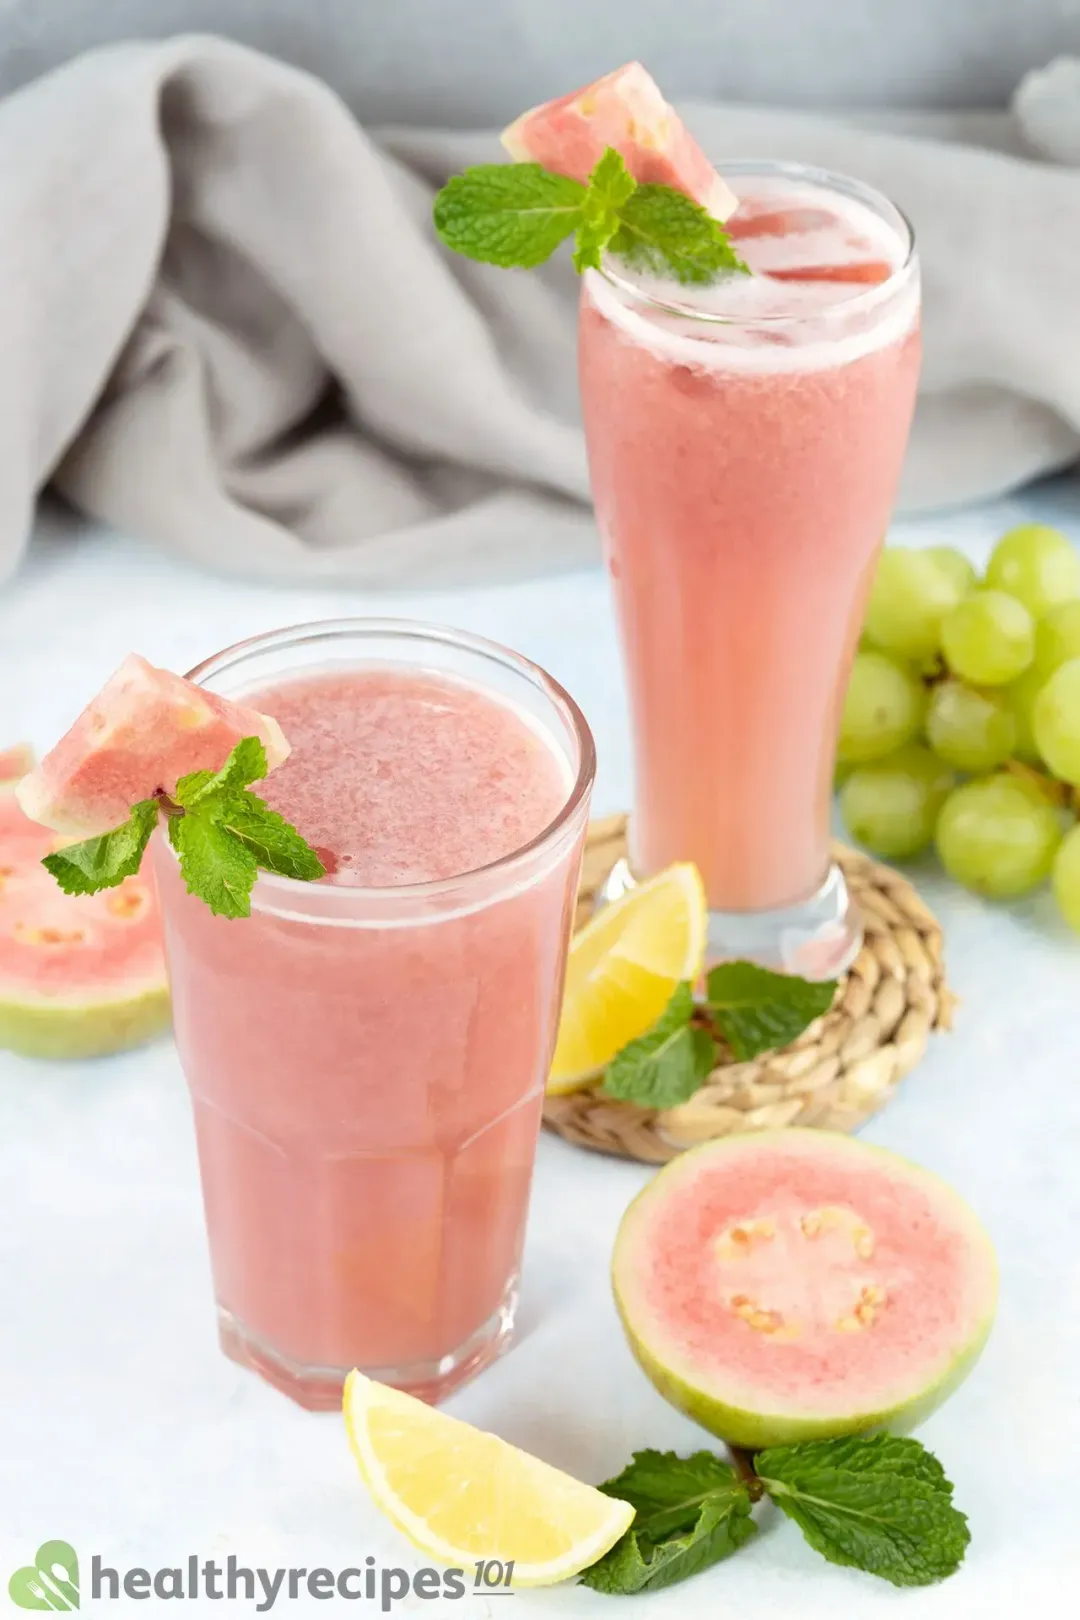 Two glasses of guava juice surrounded by pieces of guava, green grapes, and lemon slices